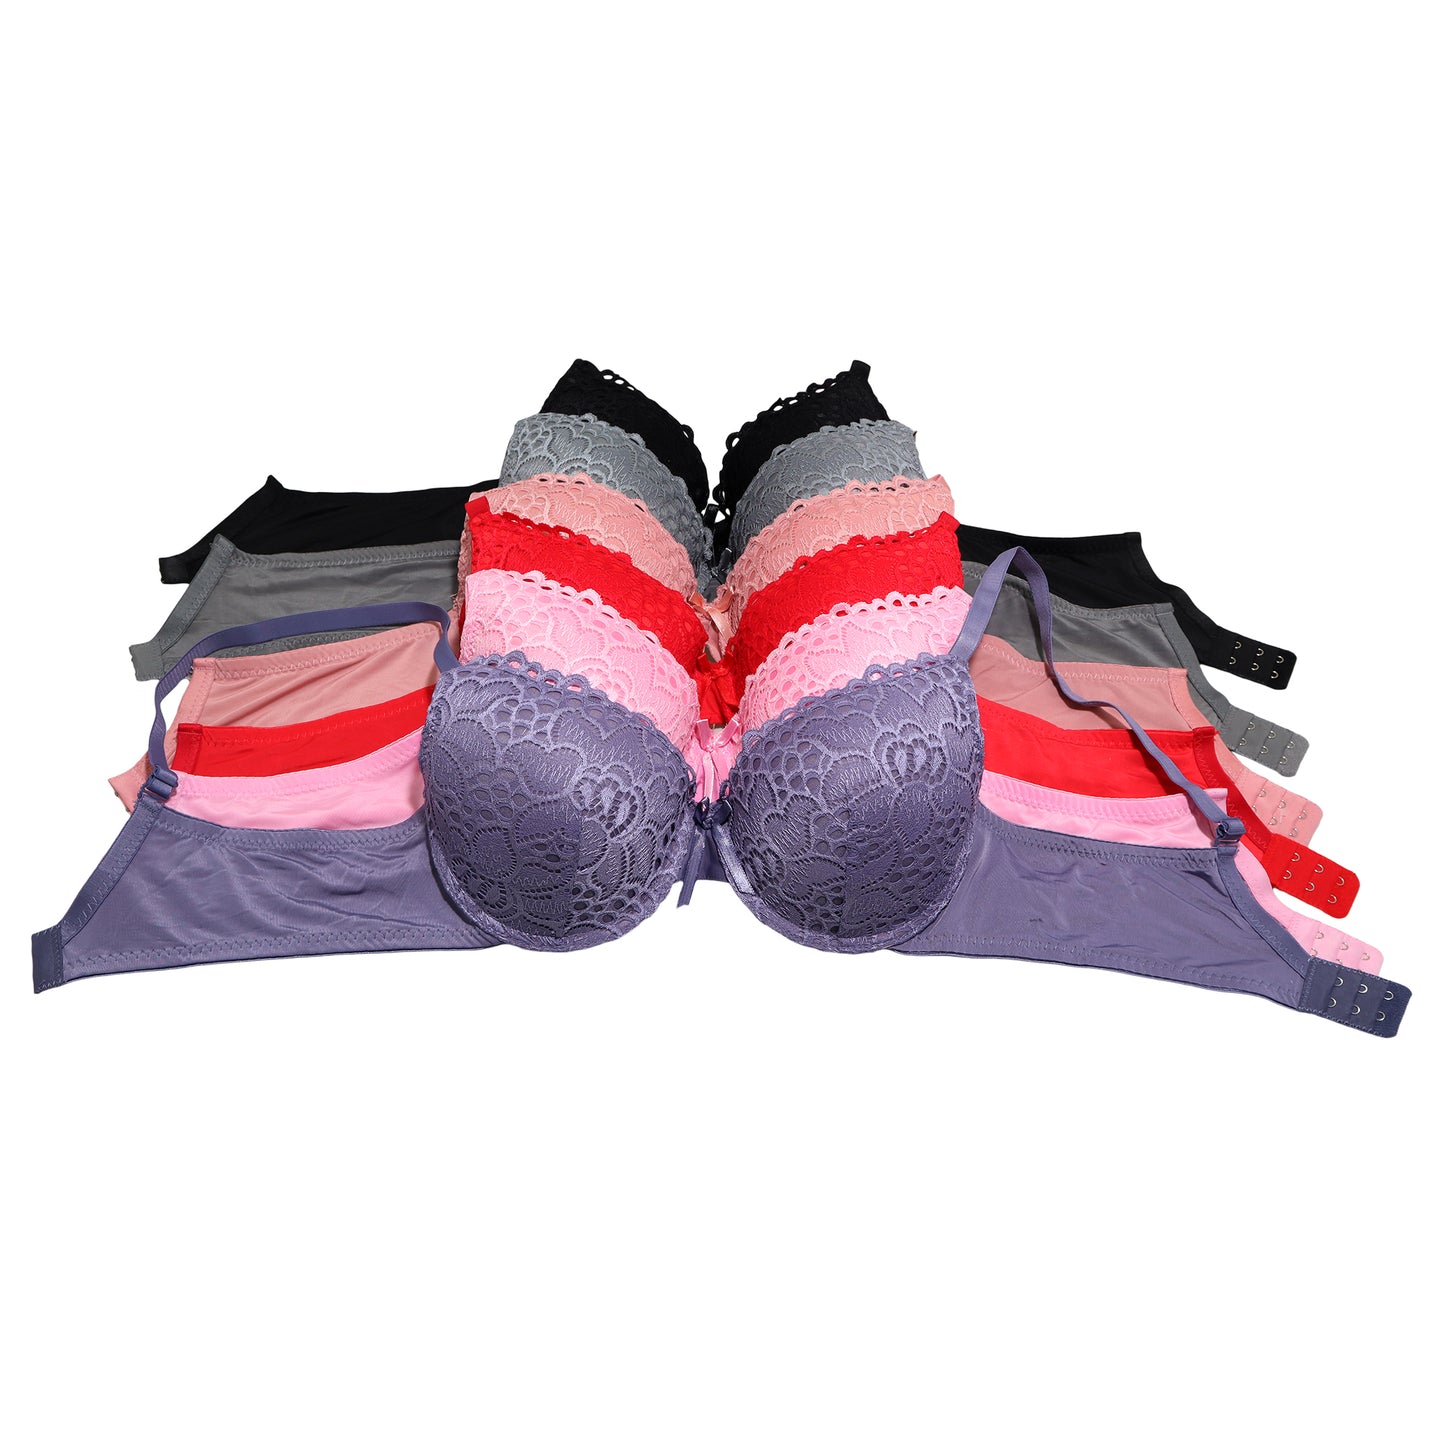 Matching Bra and Panties Set with Flower Lace Design (6-Pack)